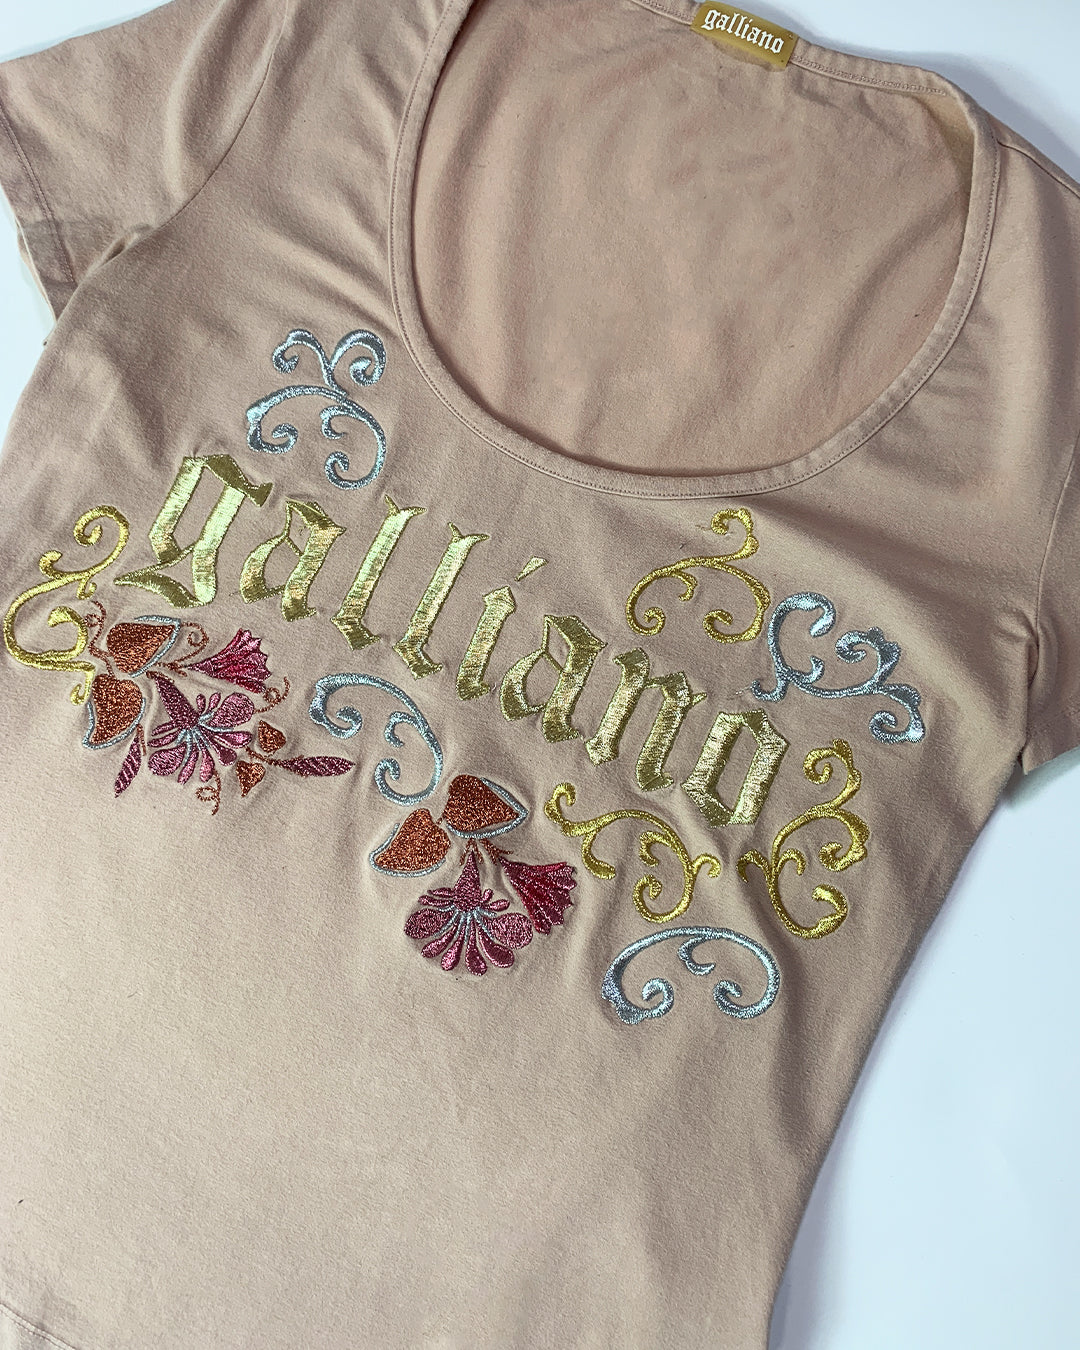 Galliano Embroidered Motif Top